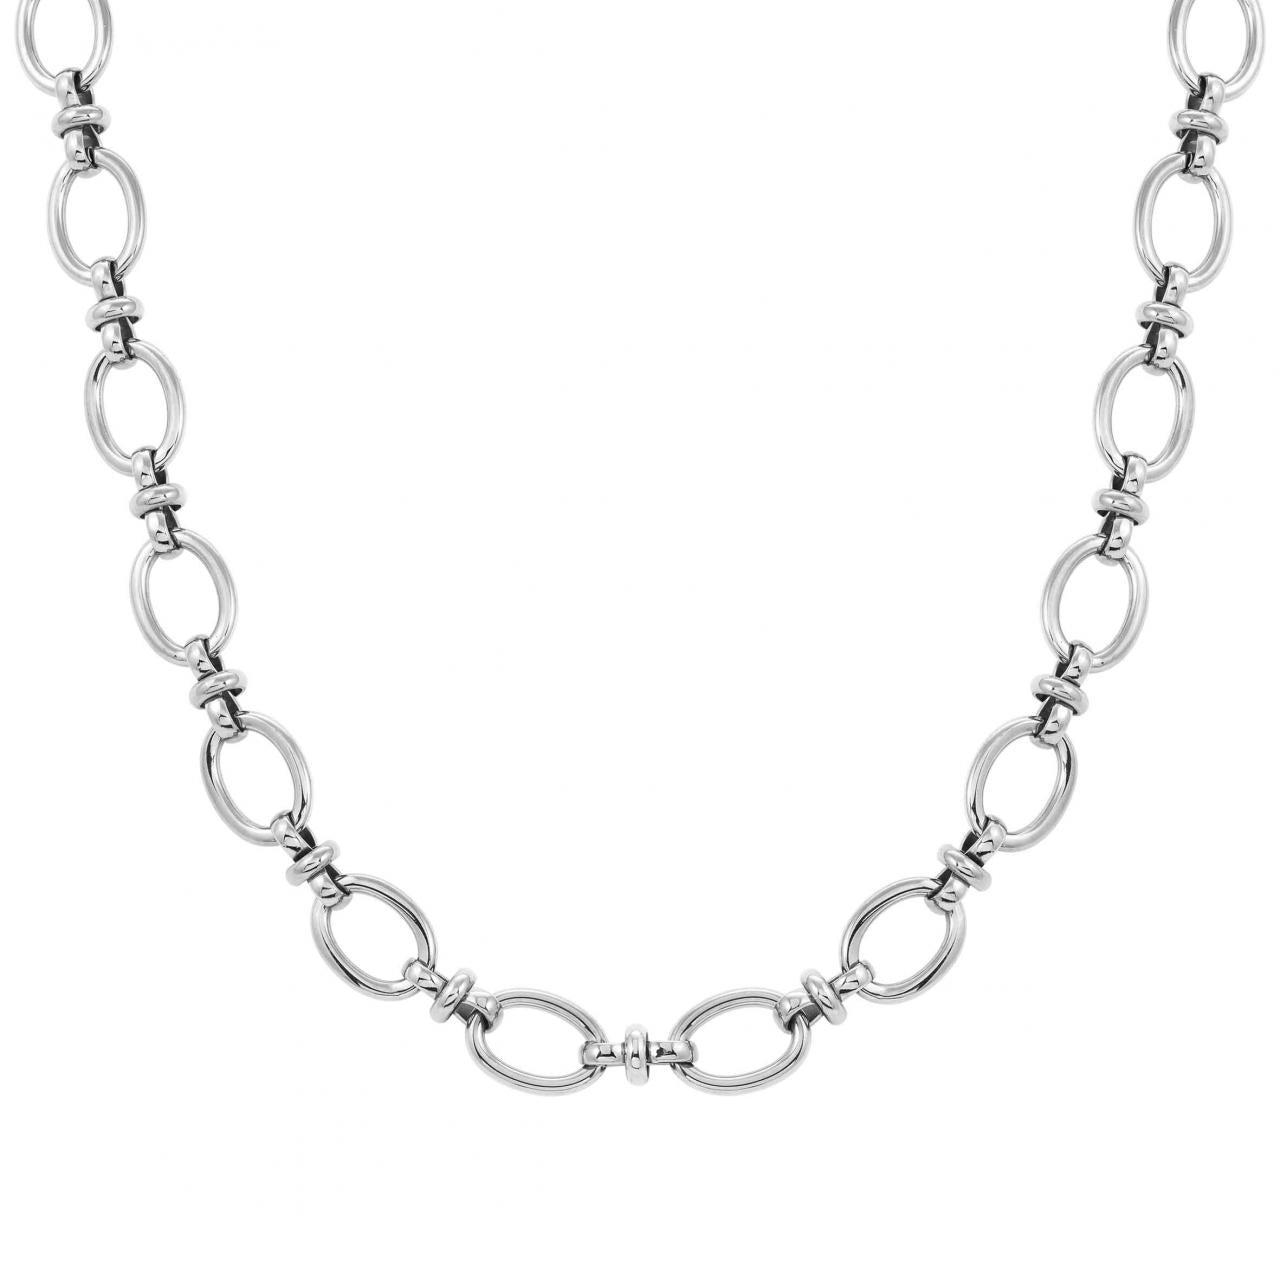 Affinity stainless steel chain necklace.